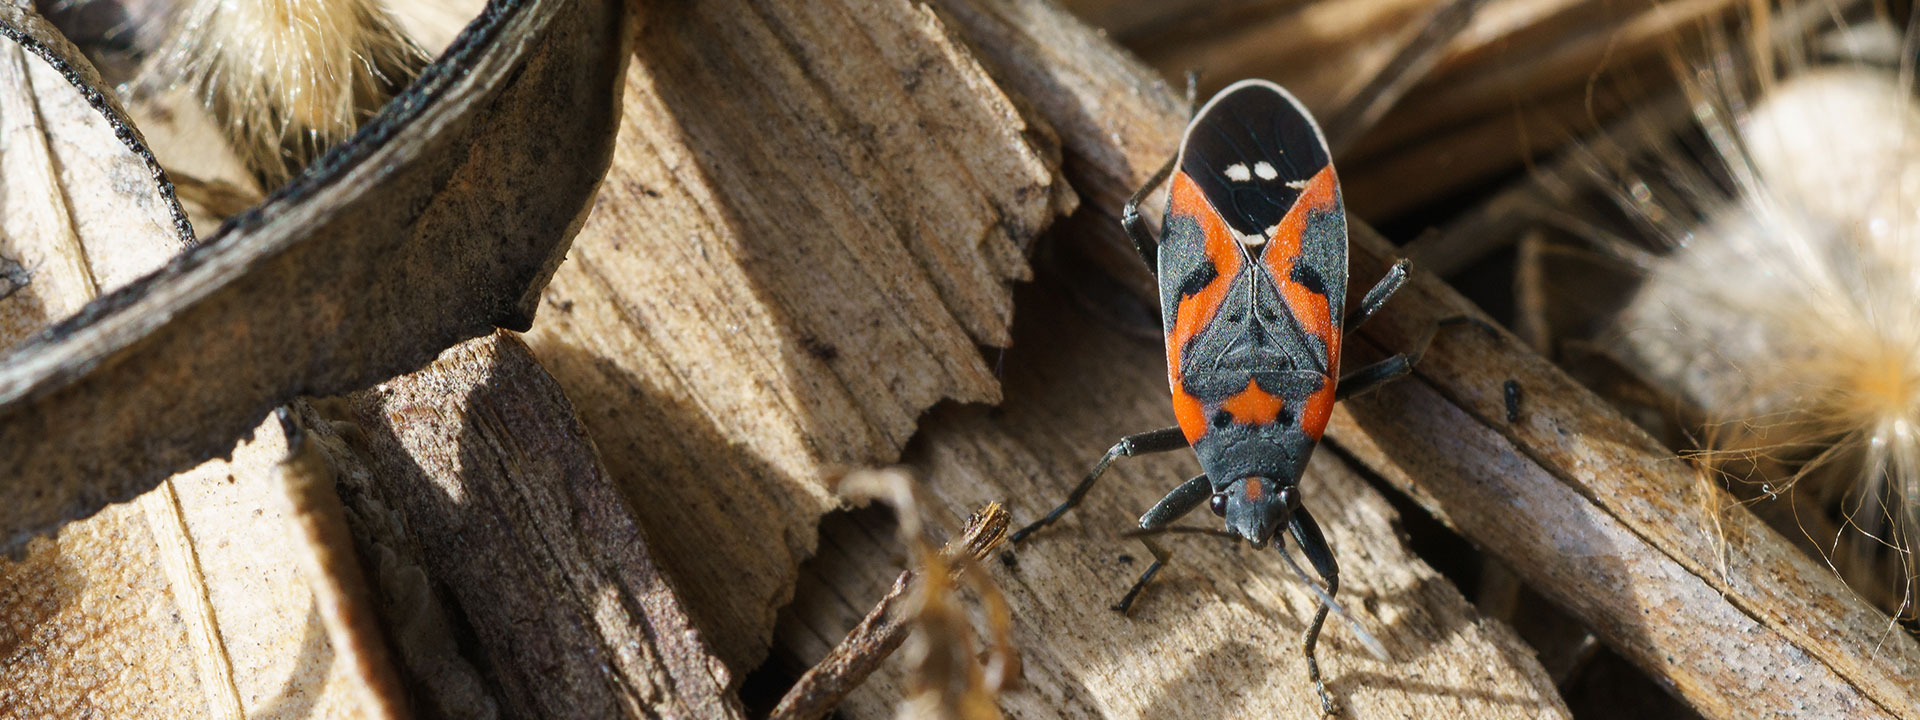 A Boxelder bug on a pile of logs.